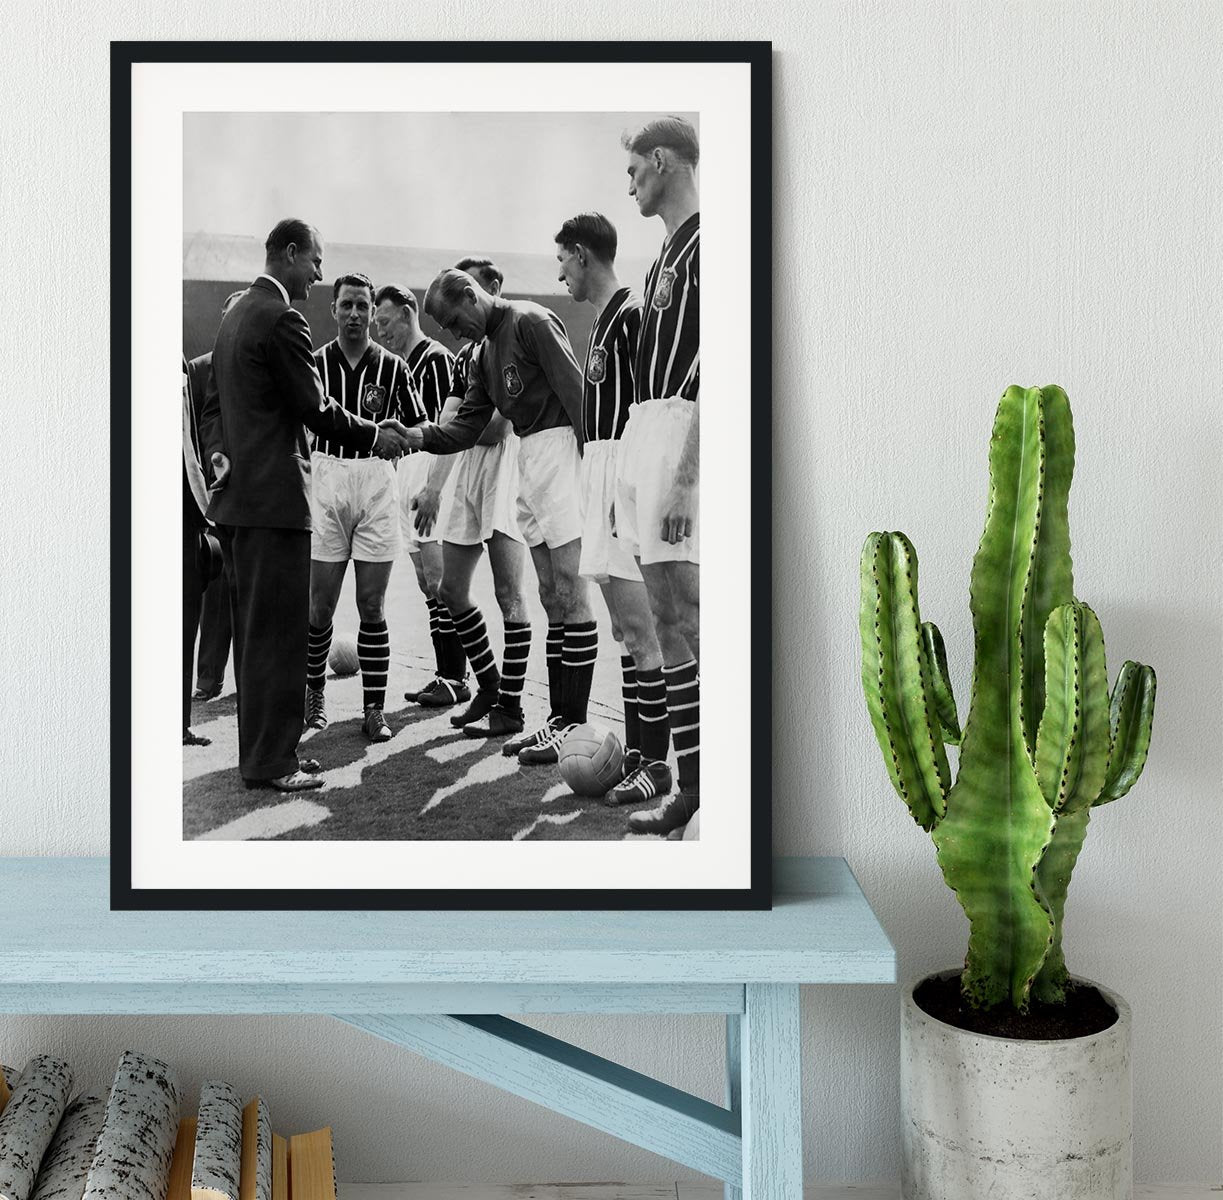 Prince Philip meeting members of Manchester City team Framed Print - Canvas Art Rocks - 1